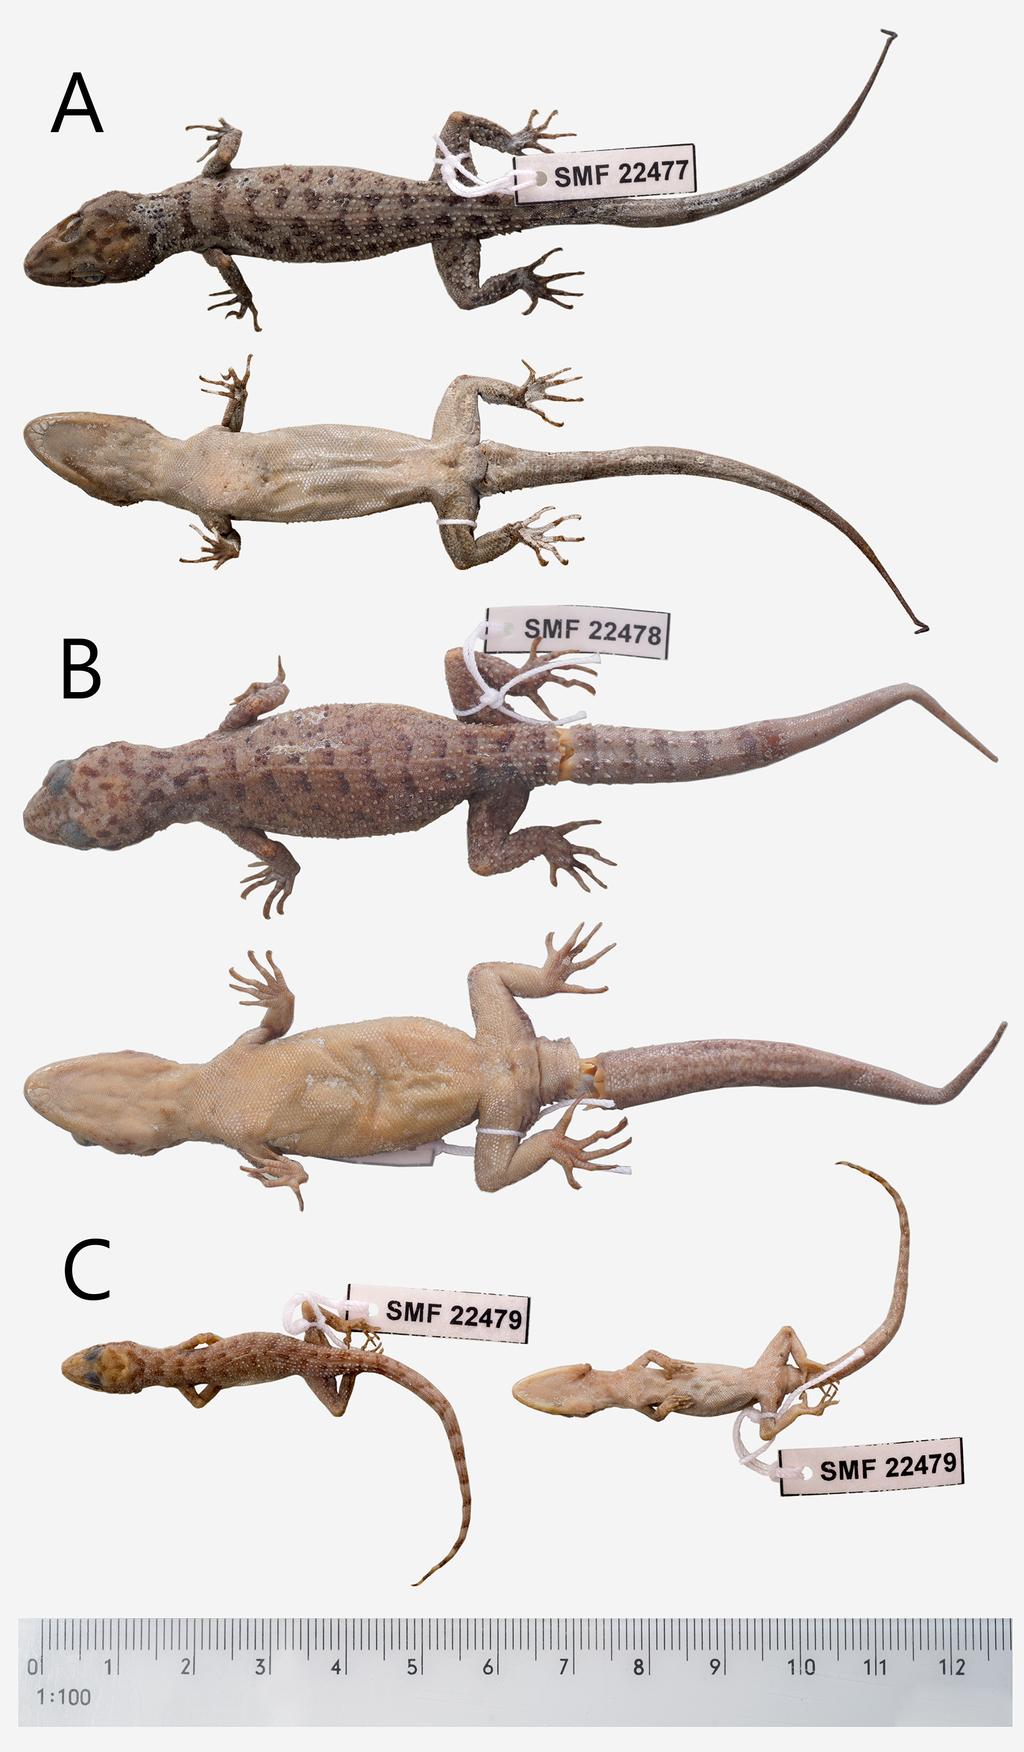 FIGURE 2. Paratype series of Cyrtodactylus klakahensis sp. nov. in dorsal and ventral view. (A) SMF 22477, an adult male.